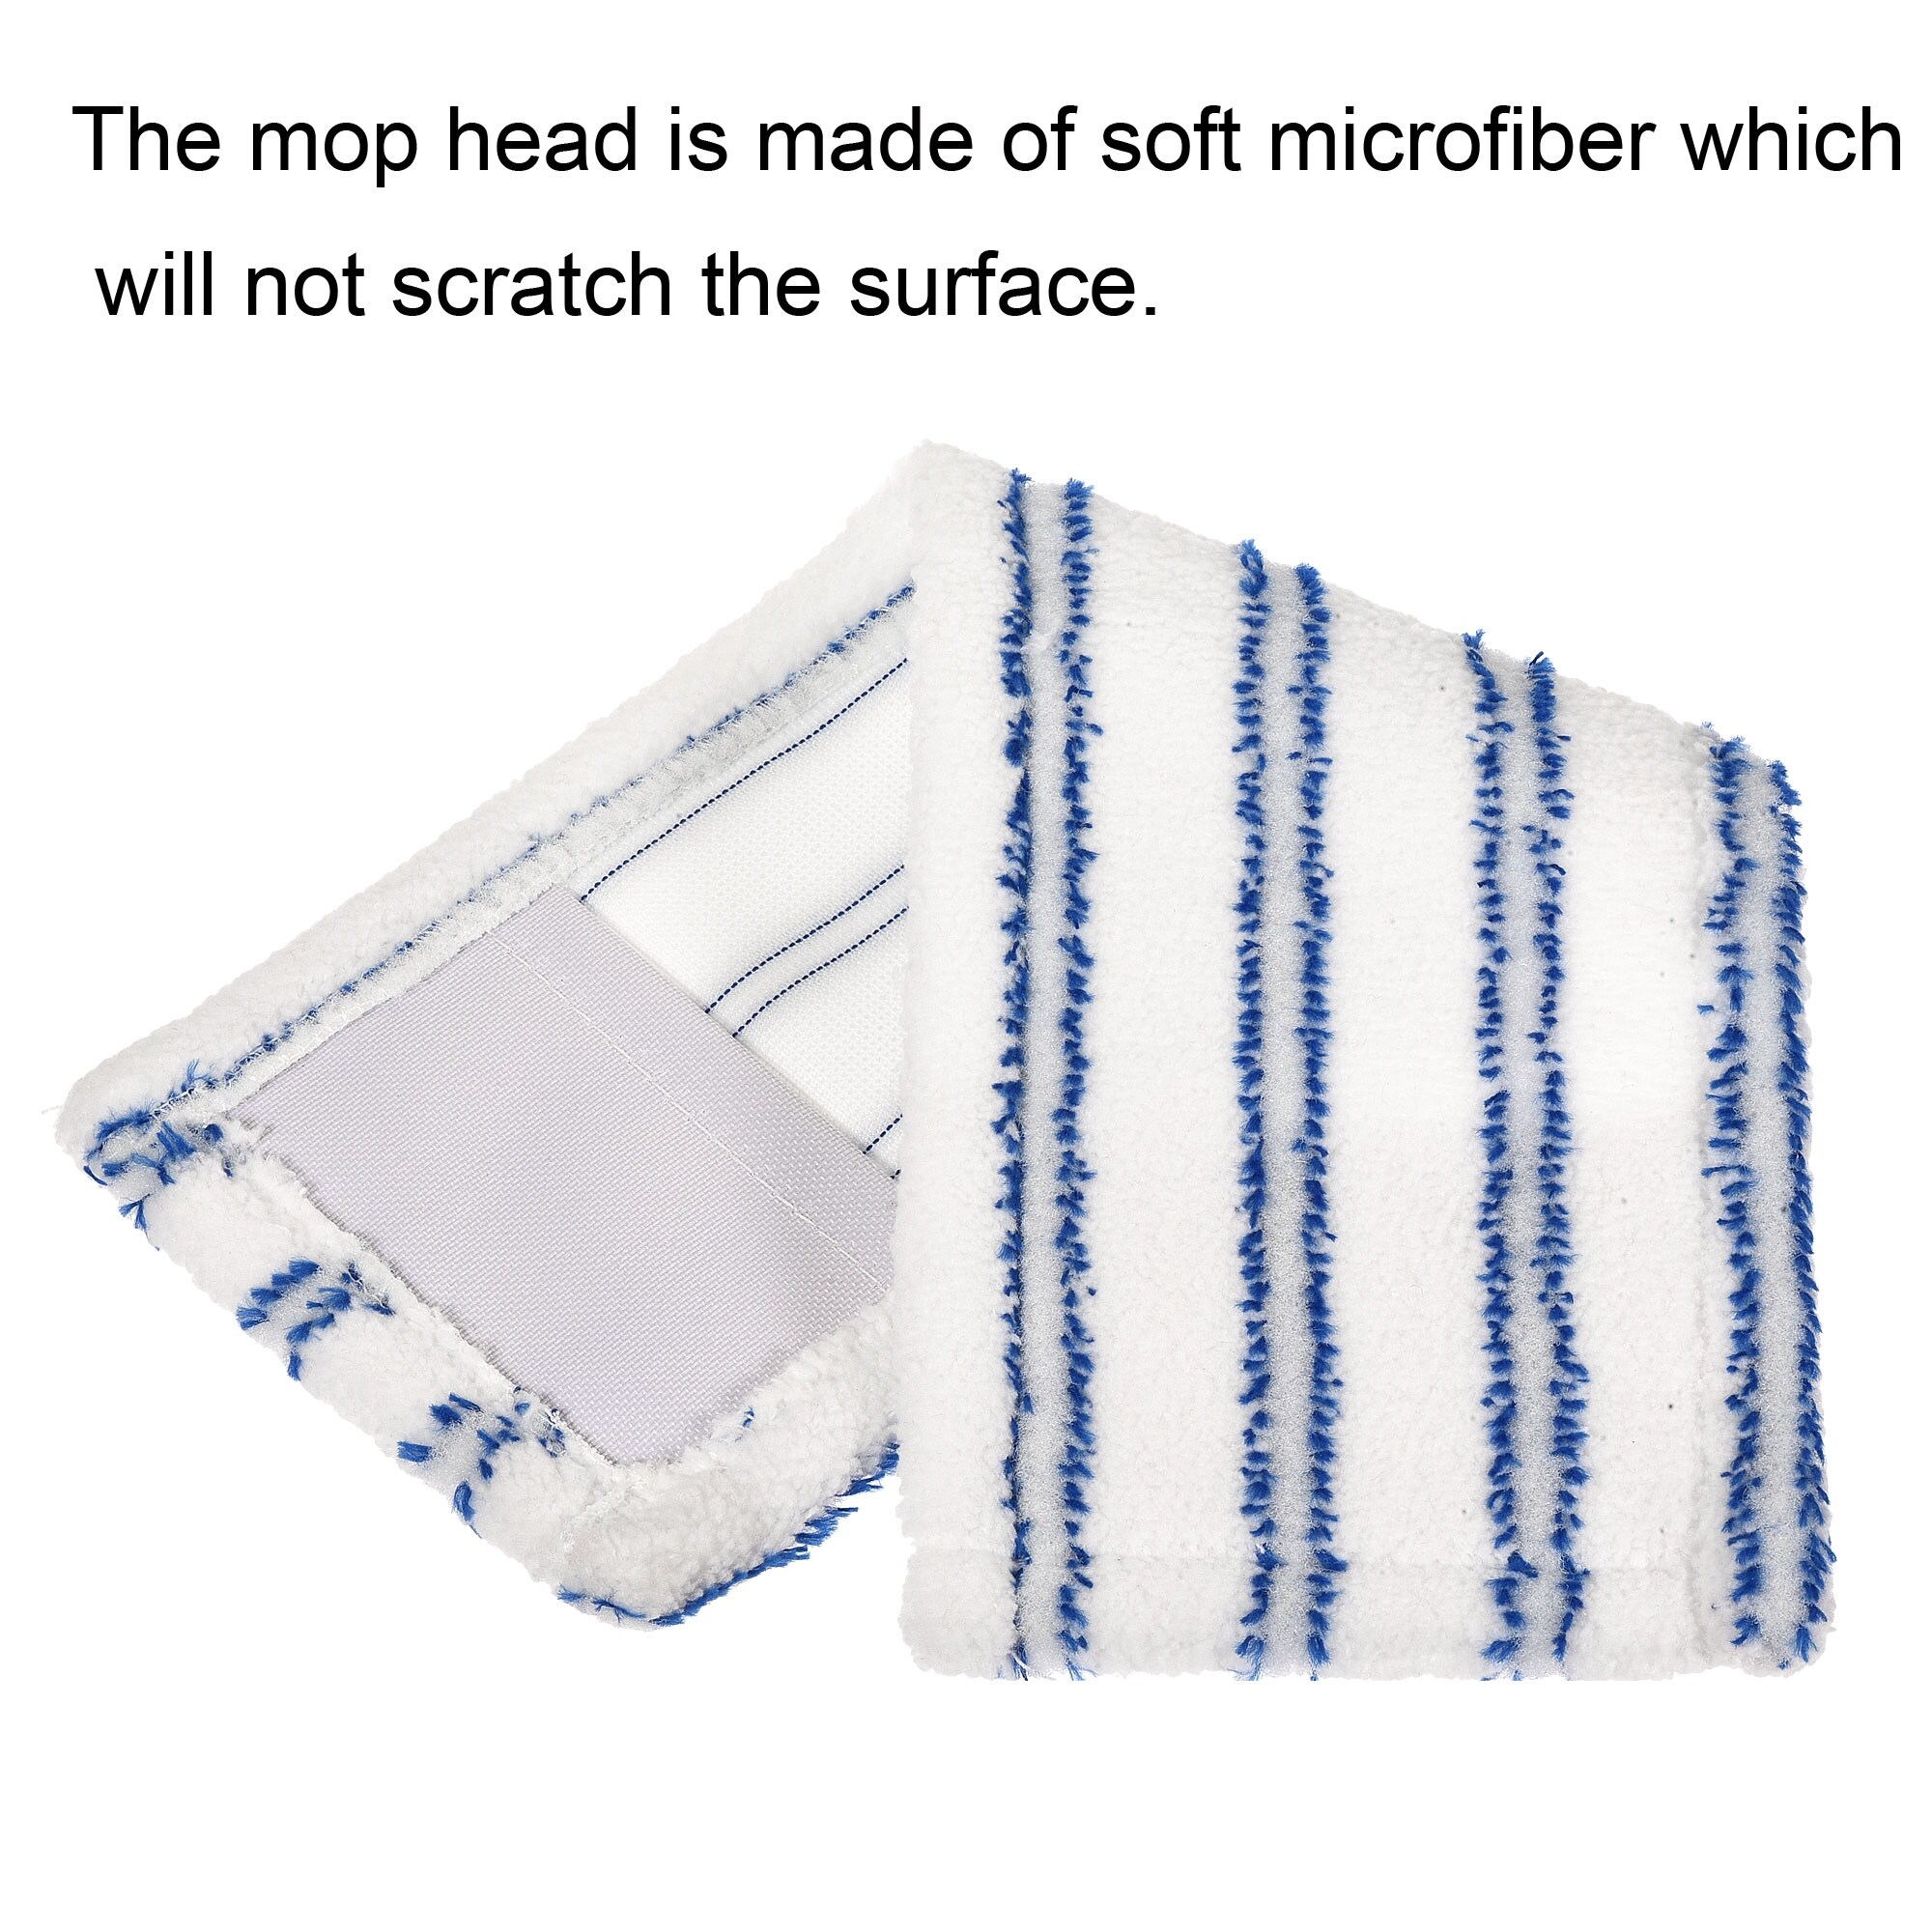 https://ak1.ostkcdn.com/images/products/is/images/direct/4a2b4aad2f71a20b3555c8772c86952a718822c3/Microfiber-Mop-Replacement-Heads-43x14cm-for-Wet-Dry-Mop-Floor-Cleaning-Pad-Blue.jpg